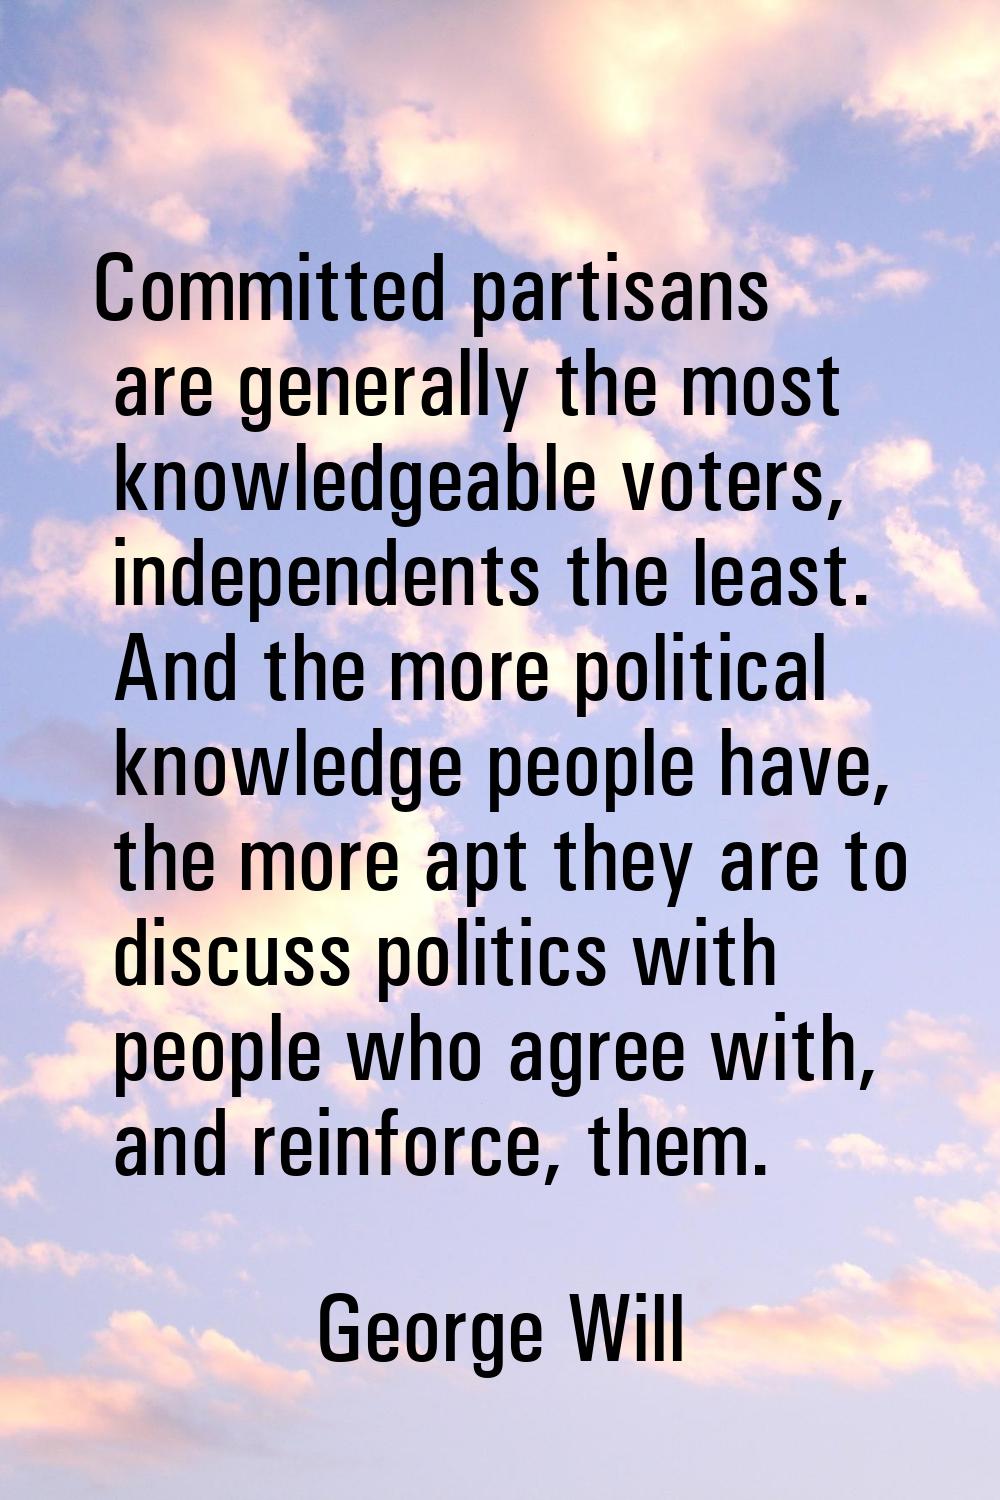 Committed partisans are generally the most knowledgeable voters, independents the least. And the mo